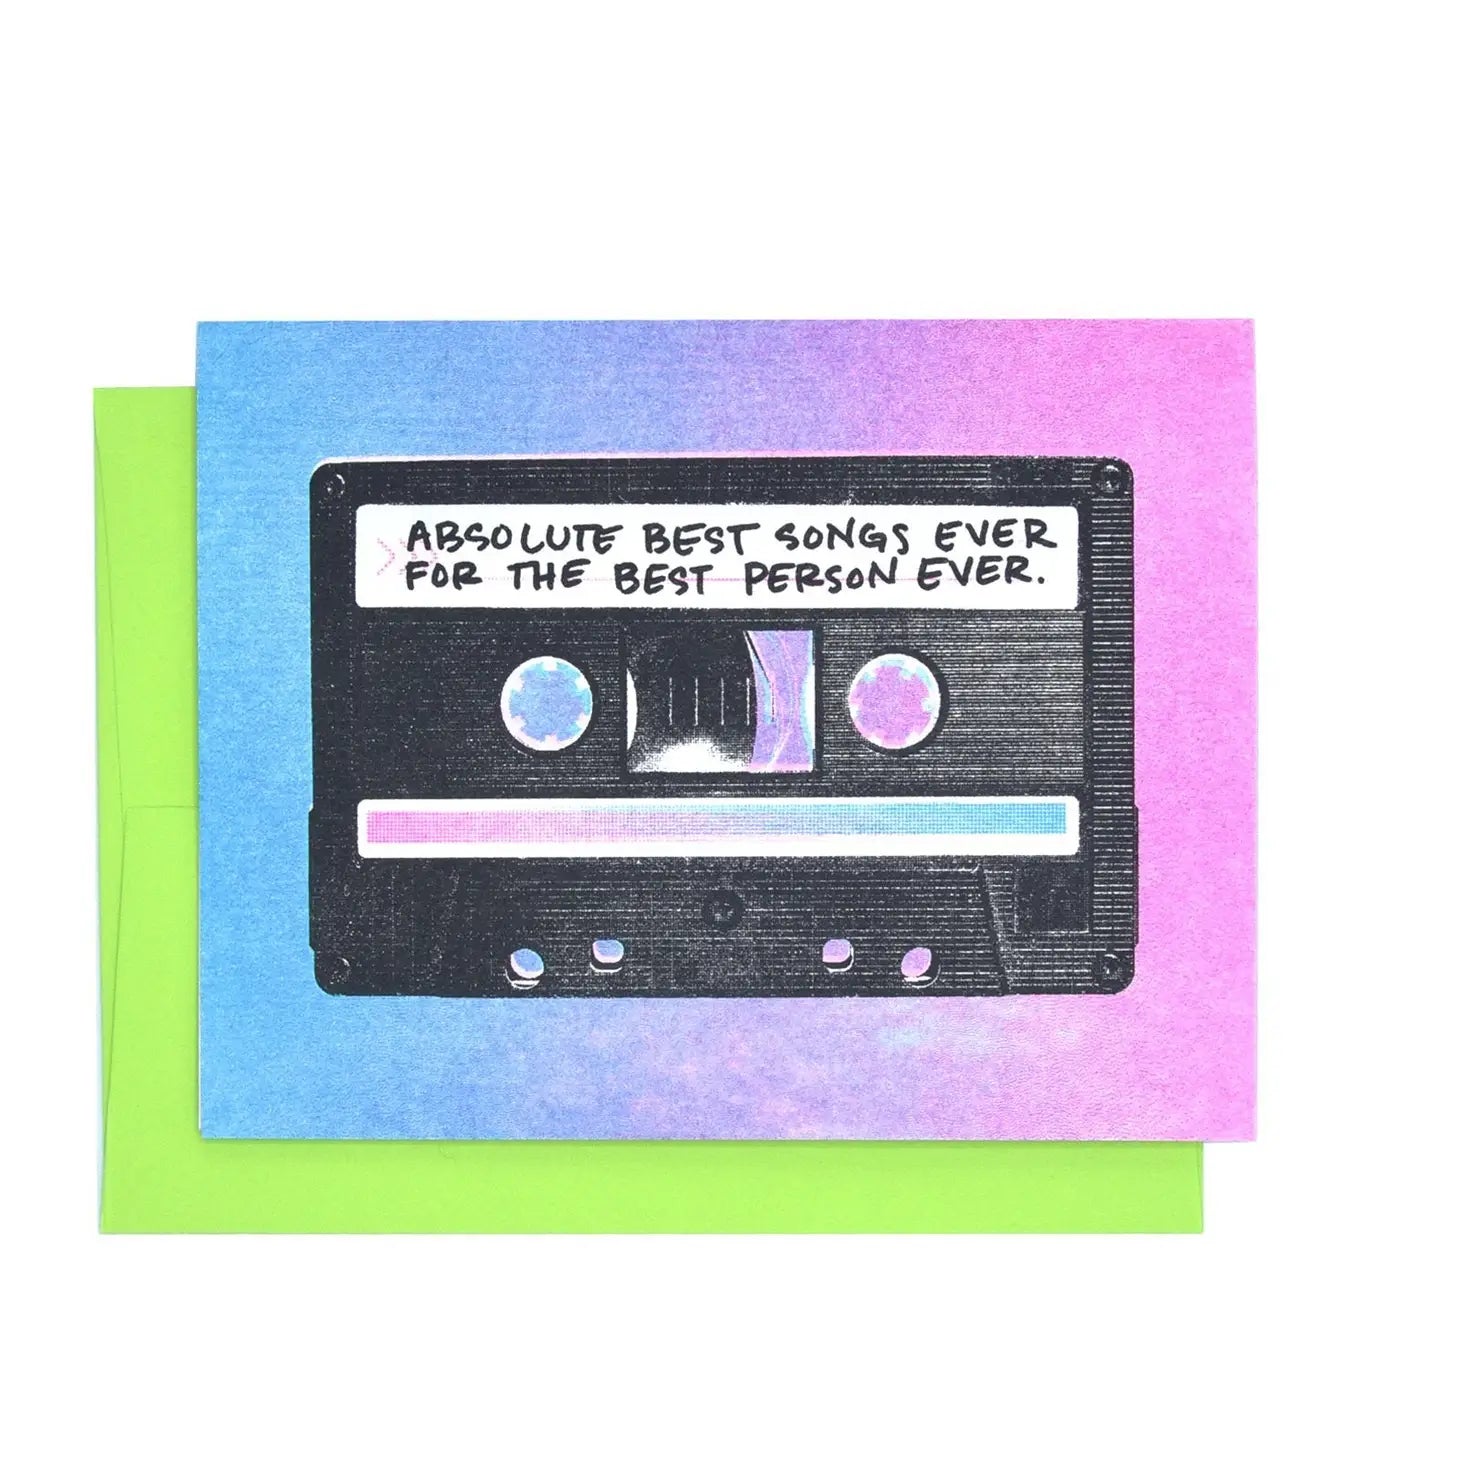 Blue and purple card with an illustration of a cassette tape. There is a white bar on the cassette with black text that reads "absolute best songs ever for the best person ever"